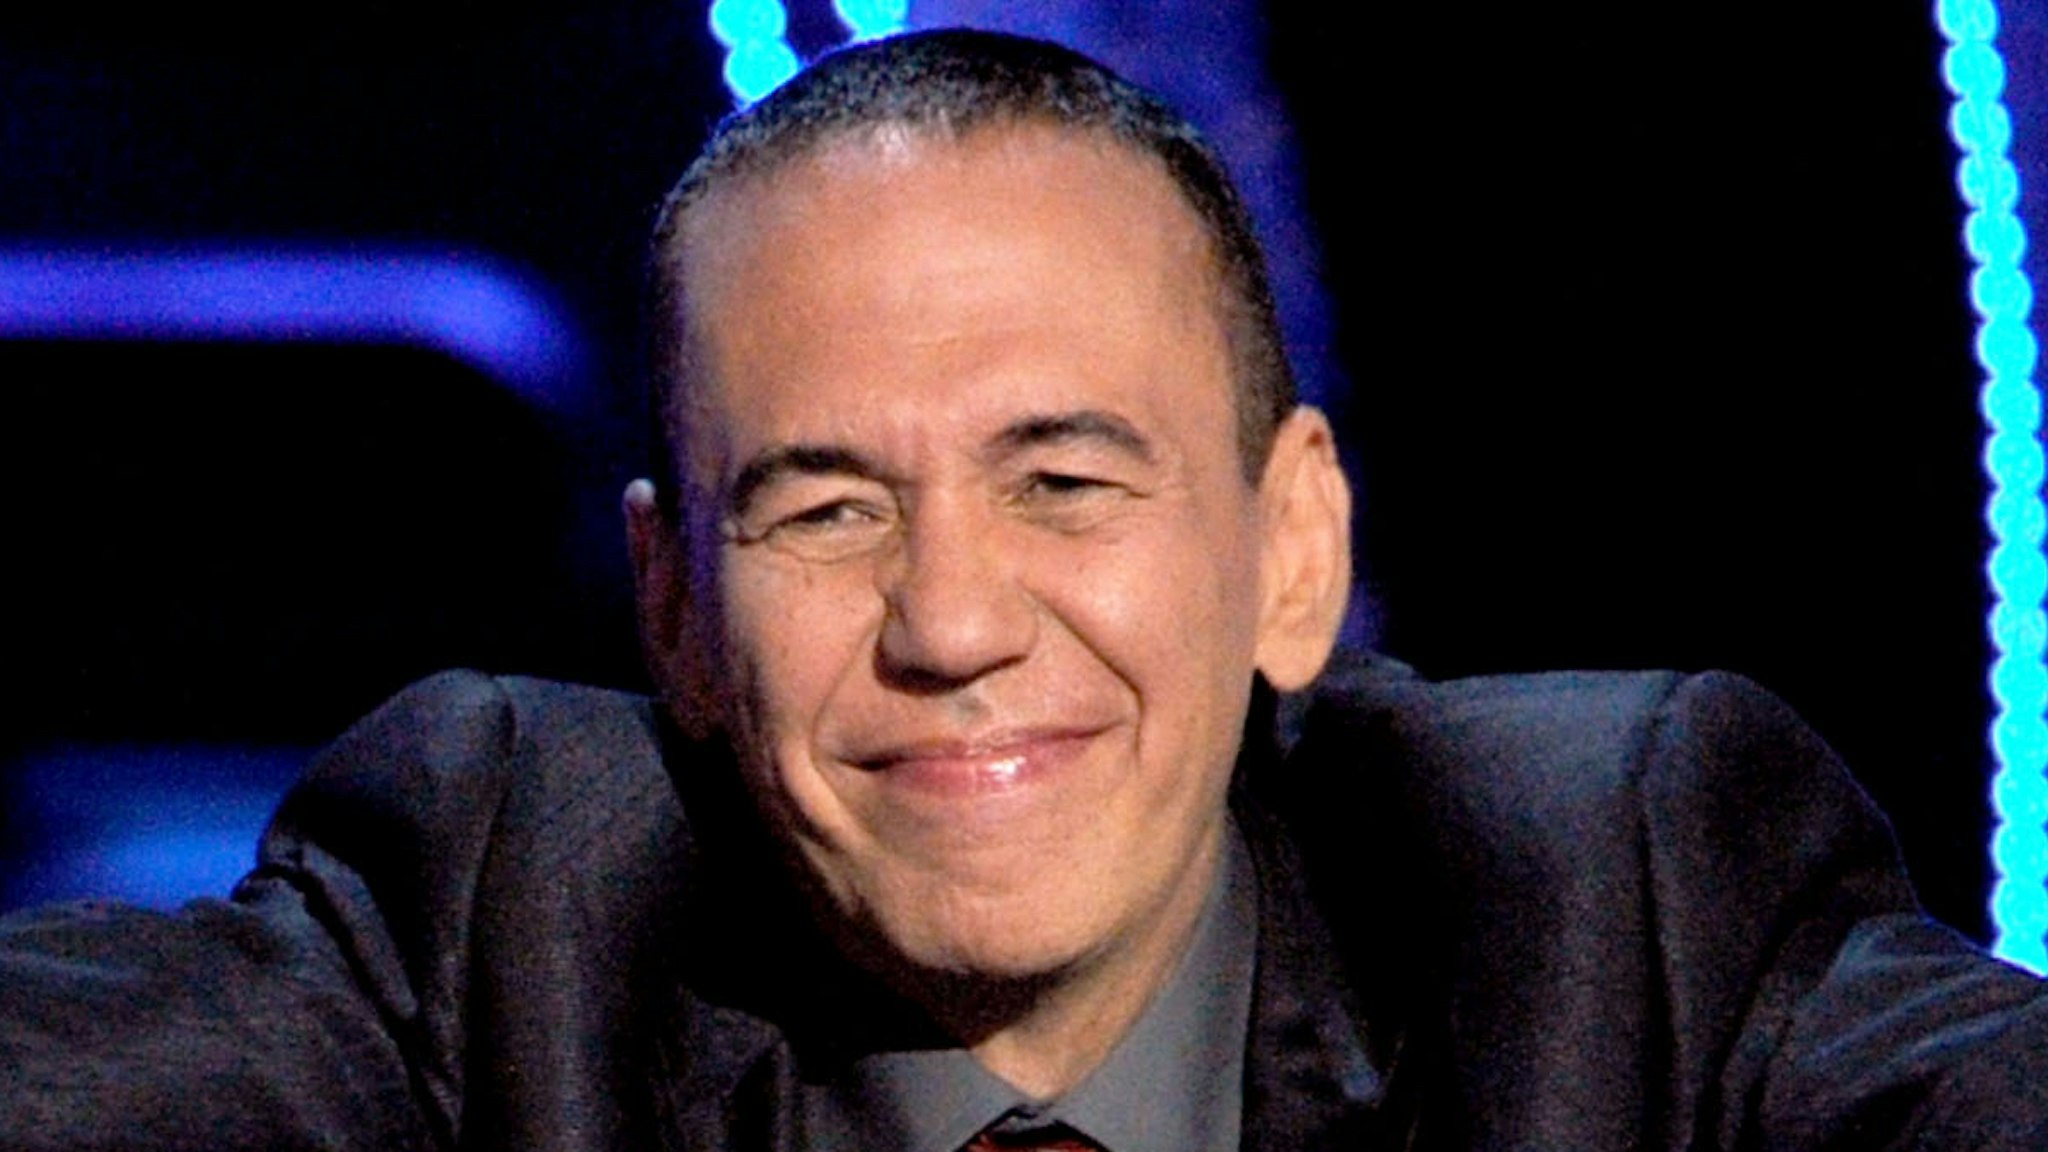 Comedian Gilbert Gottfried speaks onstage during the Comedy Central Roast of Roseanne Barr at Hollywood Palladium on August 4, 2012 in Hollywood, California.